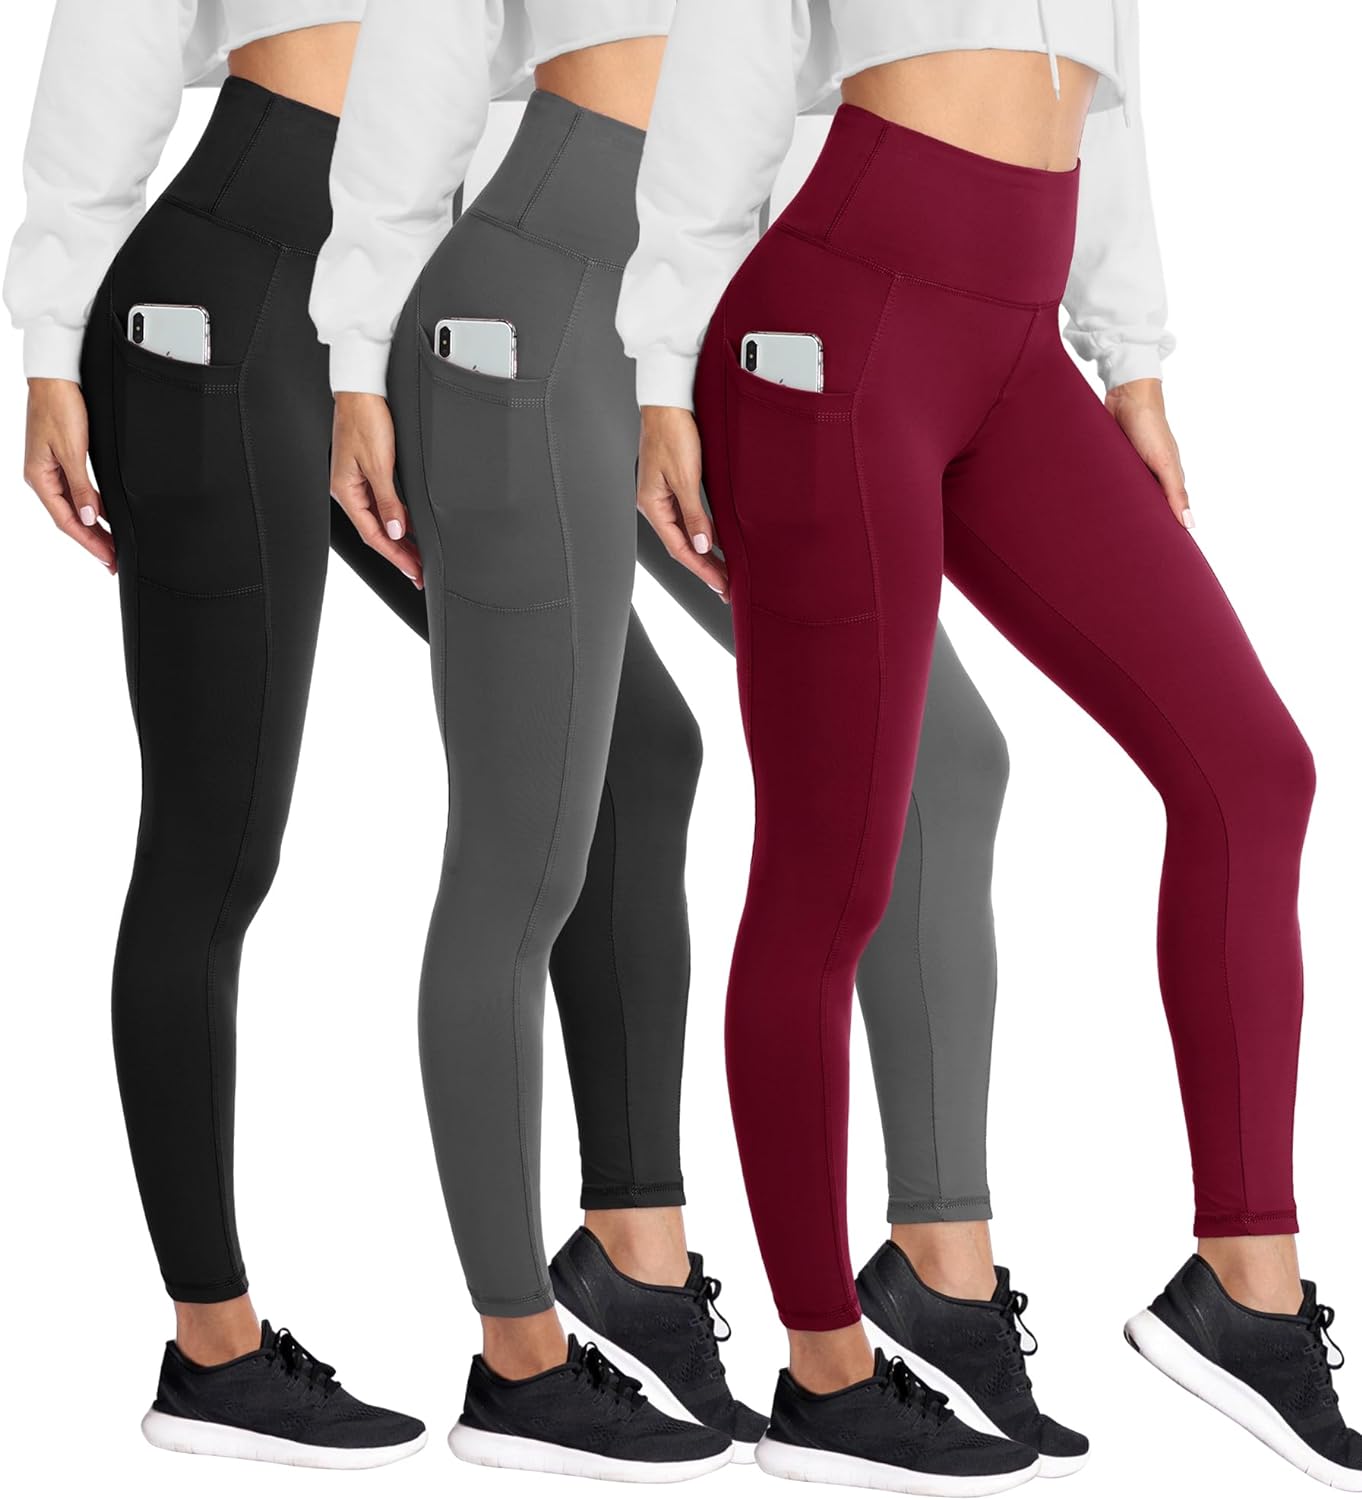 HIGHDAYS 3 Pack Fleece Lined Leggings for Women with Pockets - High Waist Winter Thermal Womens Workout Running Yoga Pants